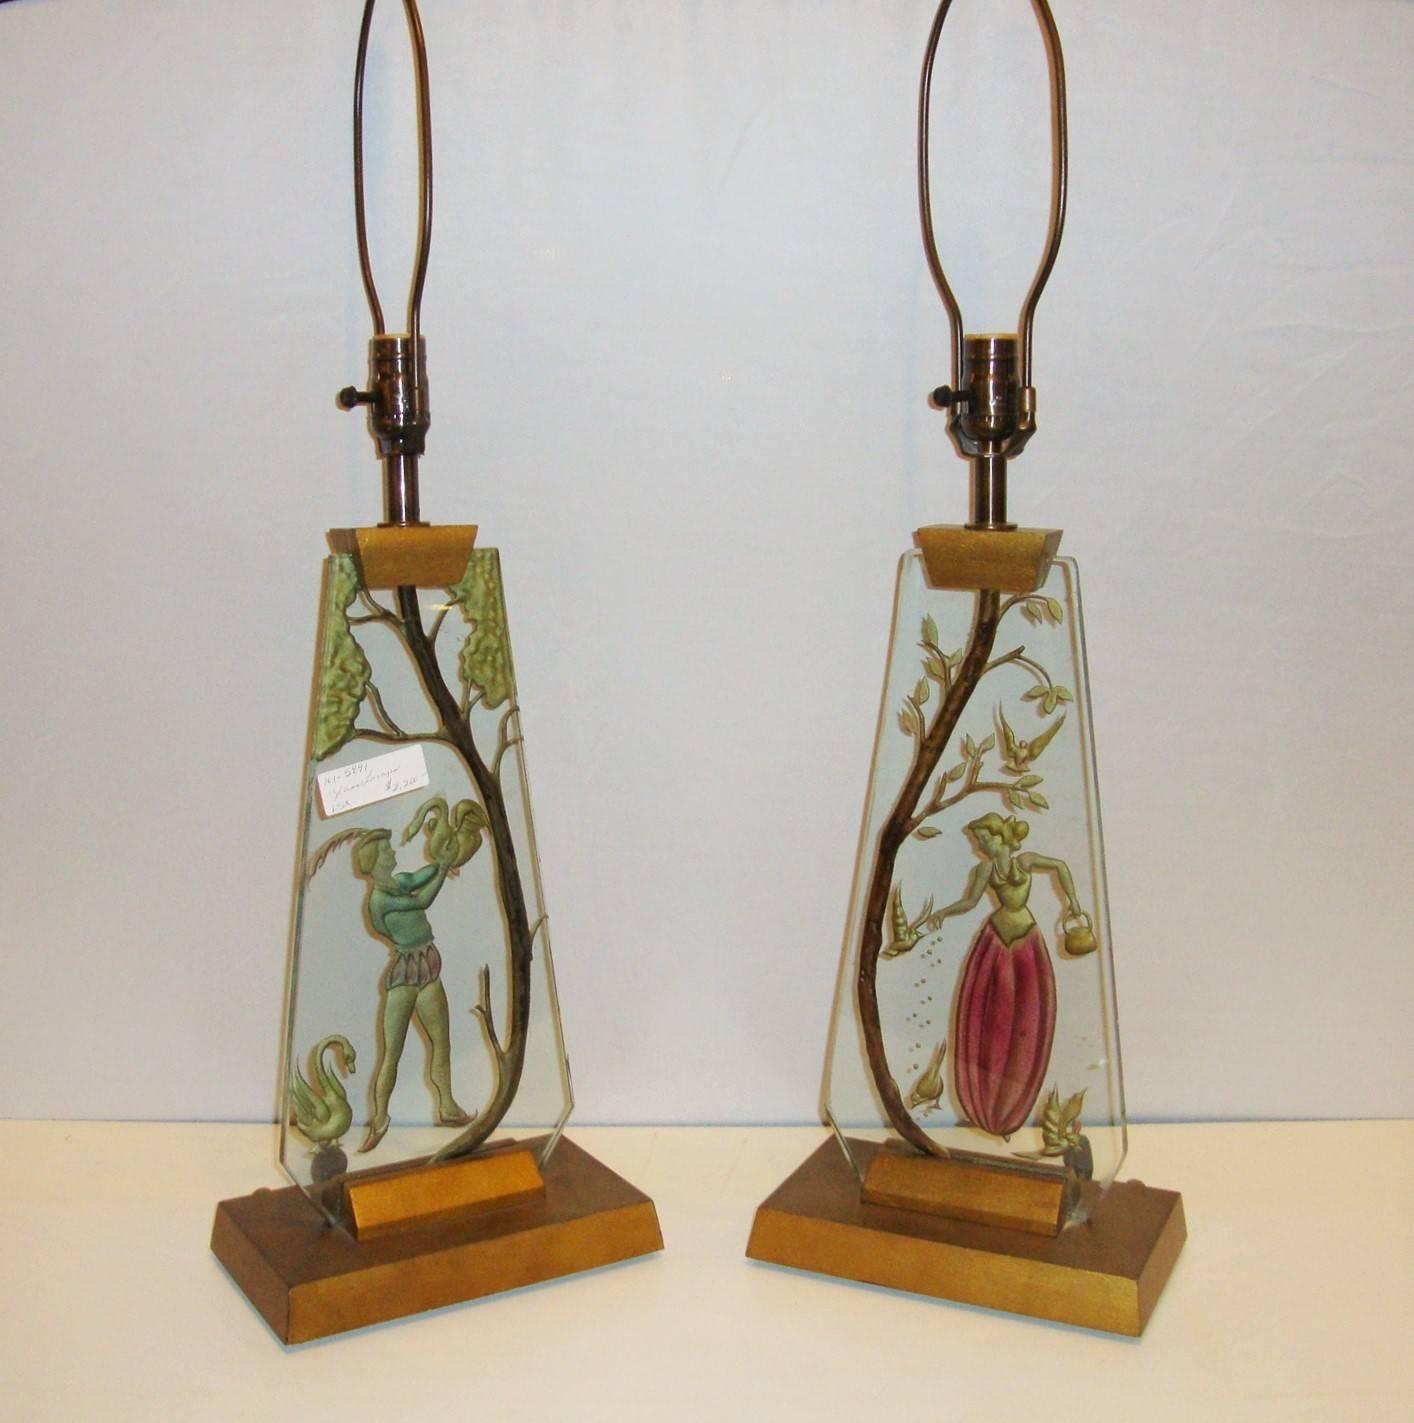 A pair of glass Mid-Century Modern table lamps. This elegant pair of Italian reverse painted glass lamps detail one hand-painted man enjoying some geese, while the other shows a woman graciously feeding birds. Both on wooden bases and wooden tops.